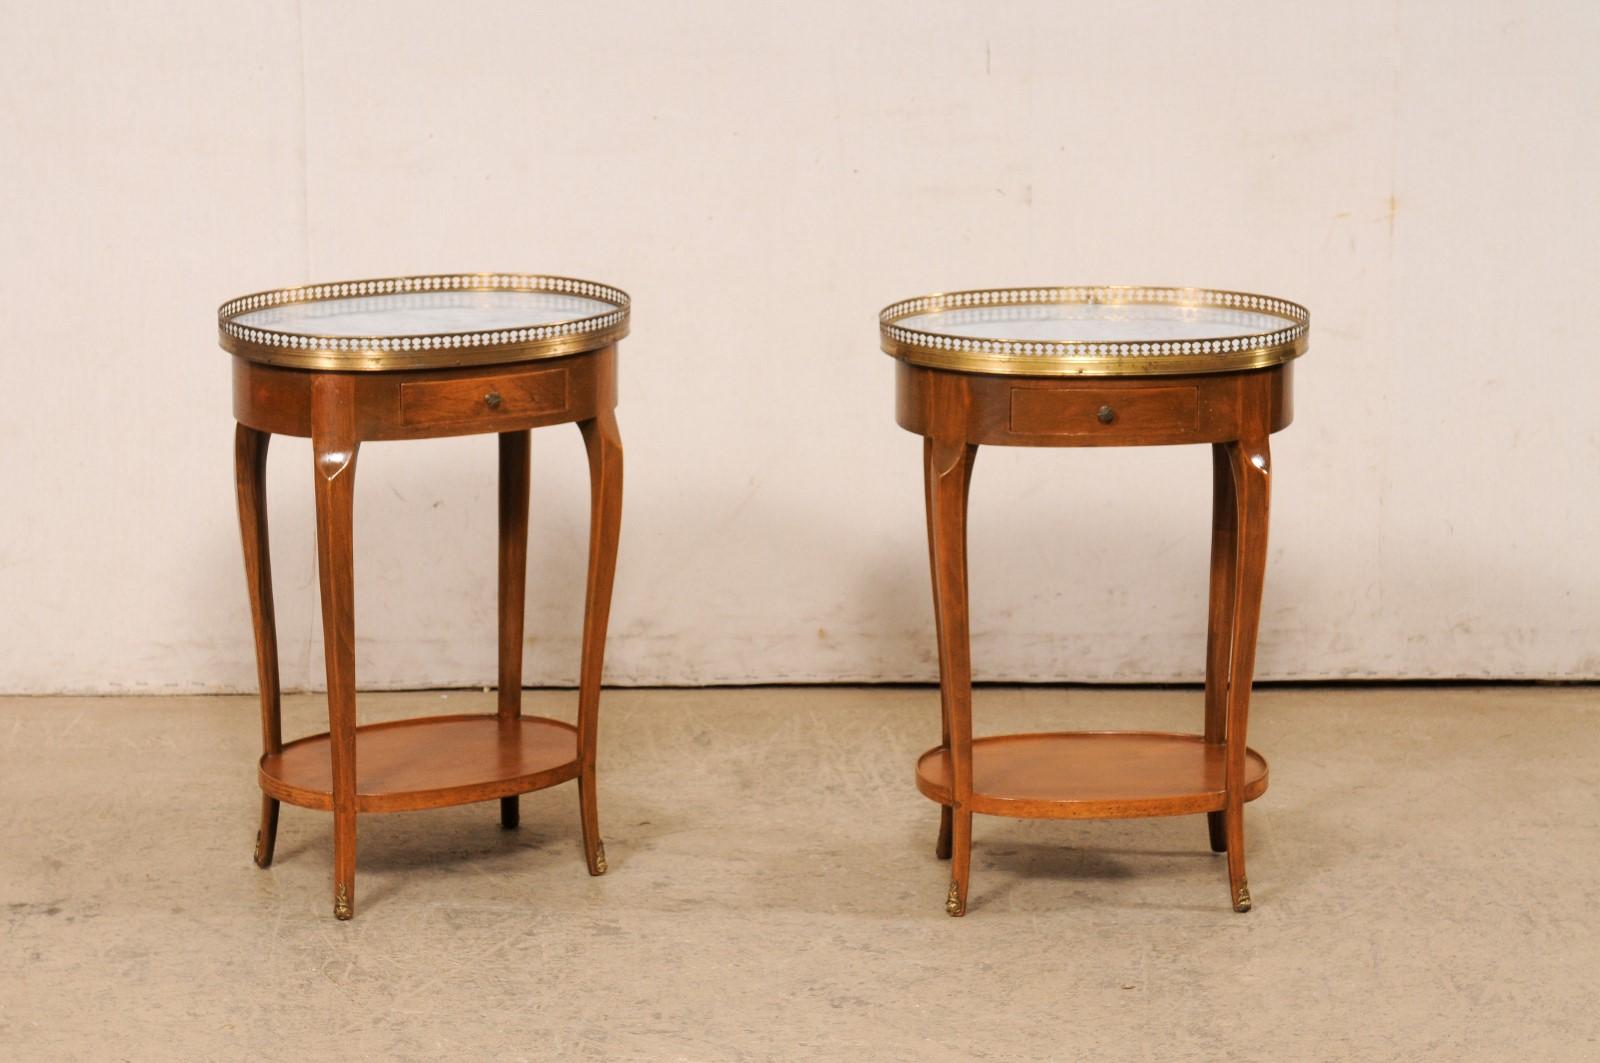 A French pair of marble and brass gallery top end tables from the mid 20th century. These vintage tables from France feature oval-shaped tops with a brass gallery edging and inset marble, upon a smooth and oval-shaped wooden apron that houses a